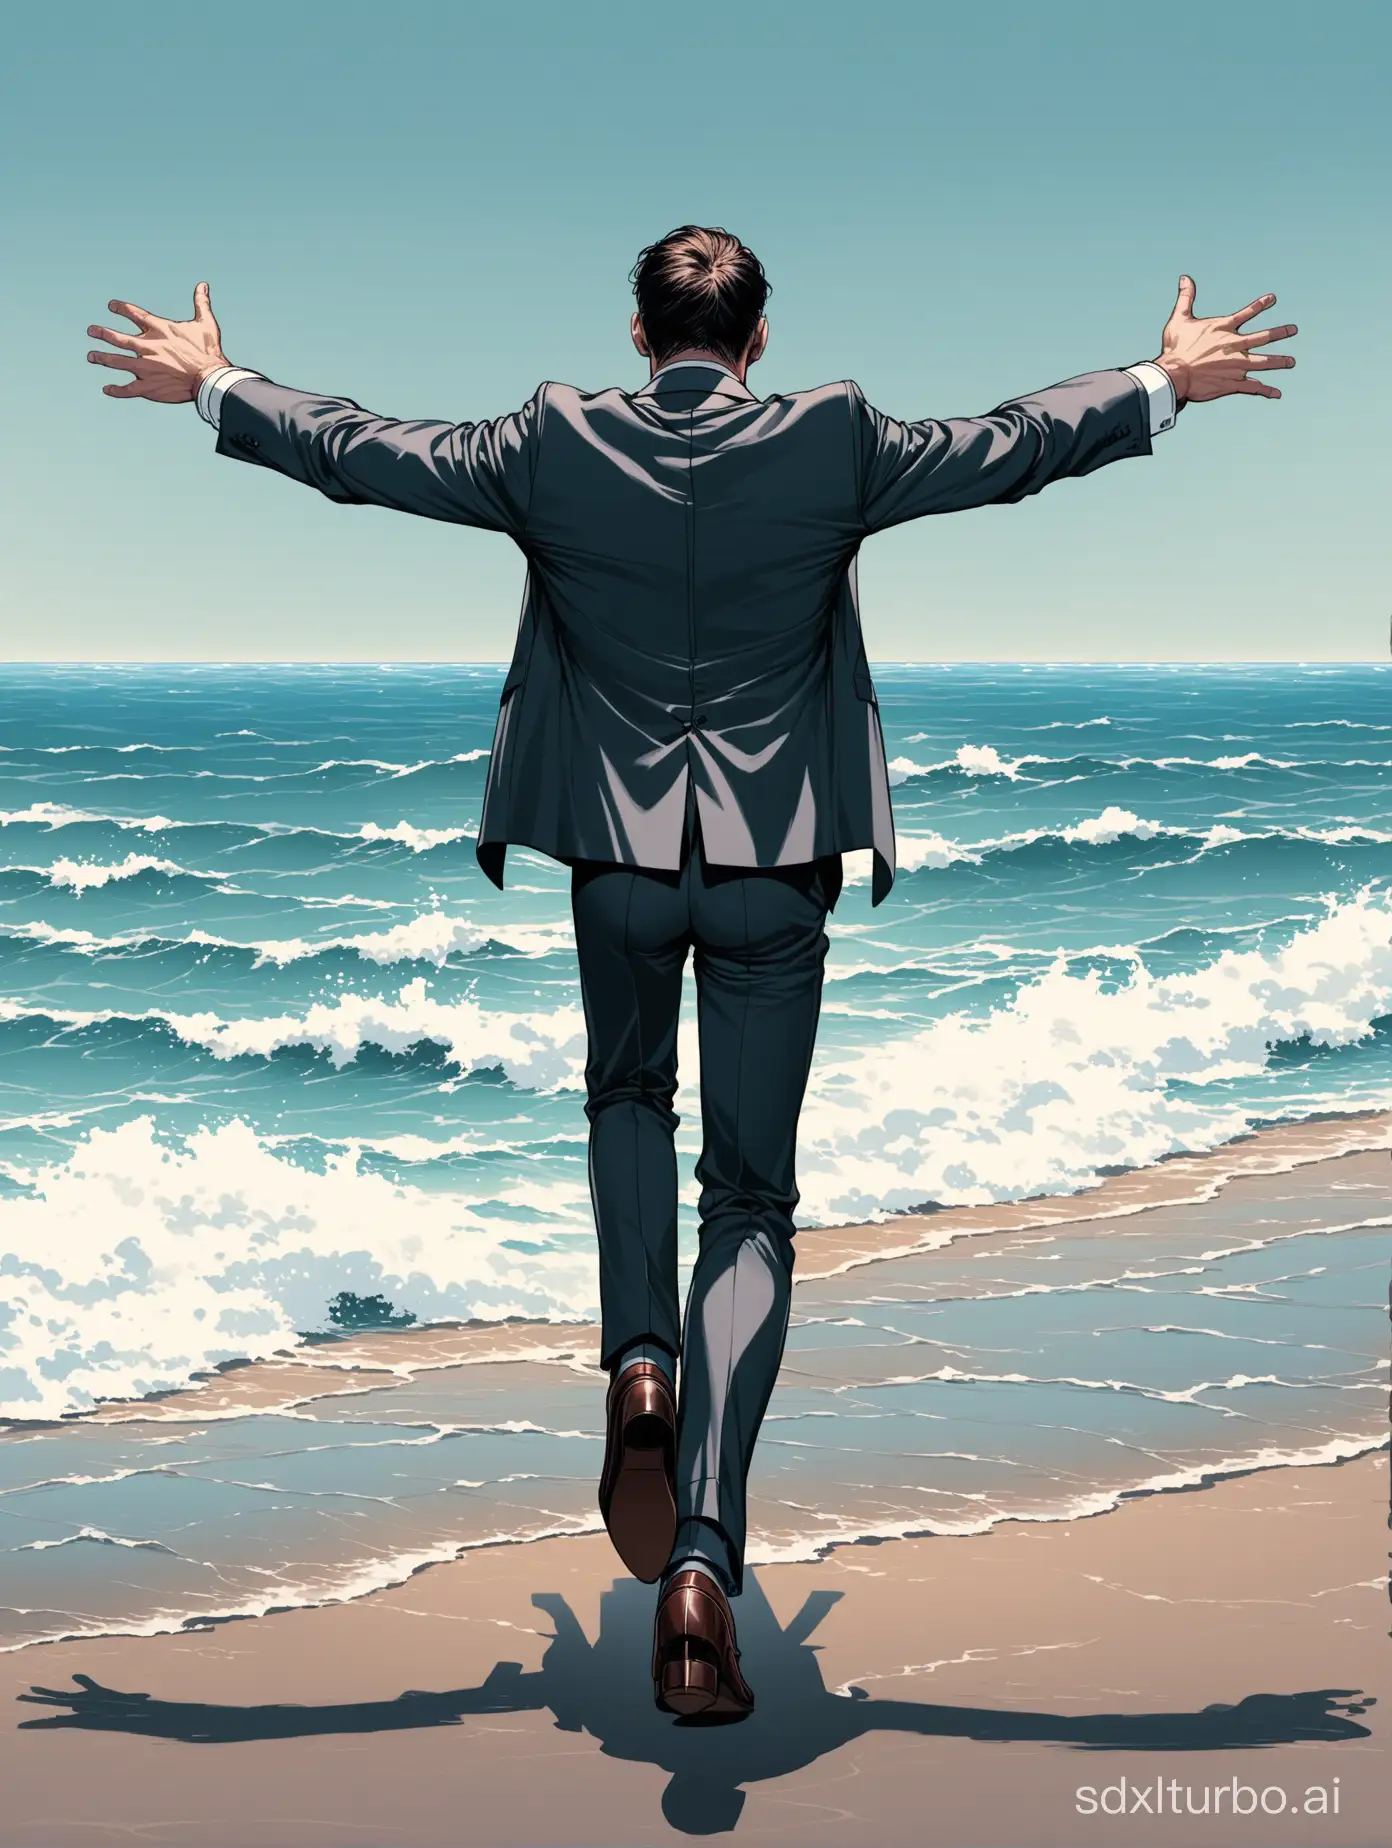 A man in a suit and leather shoes, facing the sea and with his back to the camera, shouts out 'struggle and strive',